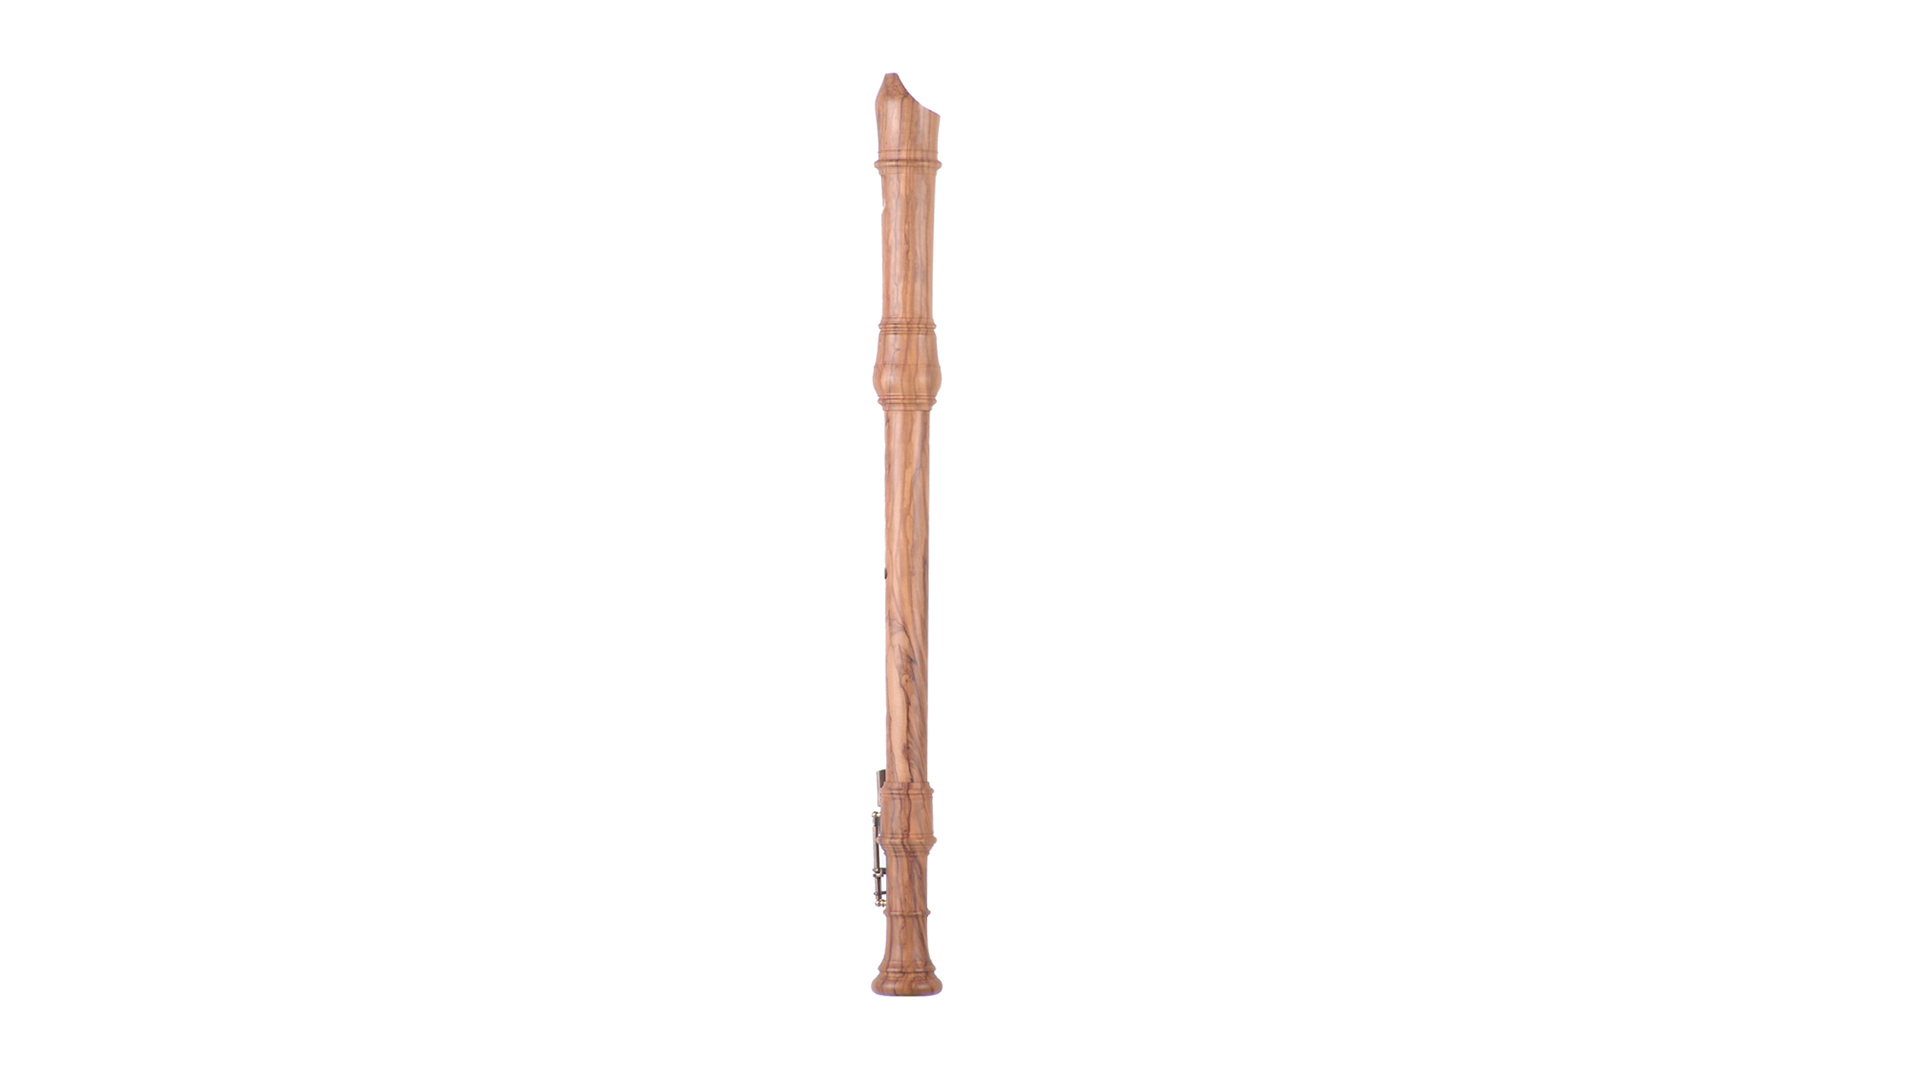 Küng, "SUPERIO", tenor in c', baroque double hole, with double key, olive wood